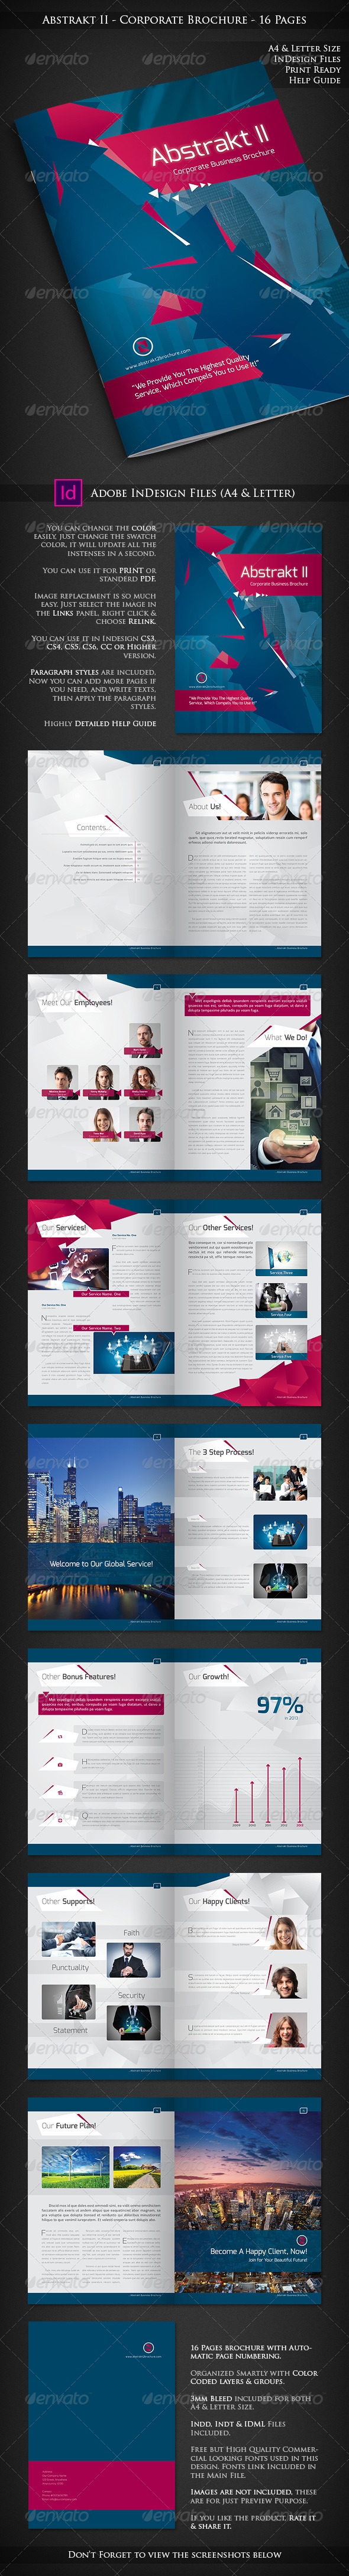 Abstrakt II - Corporate Company Profile - 16 Pages - Corporate Brochures